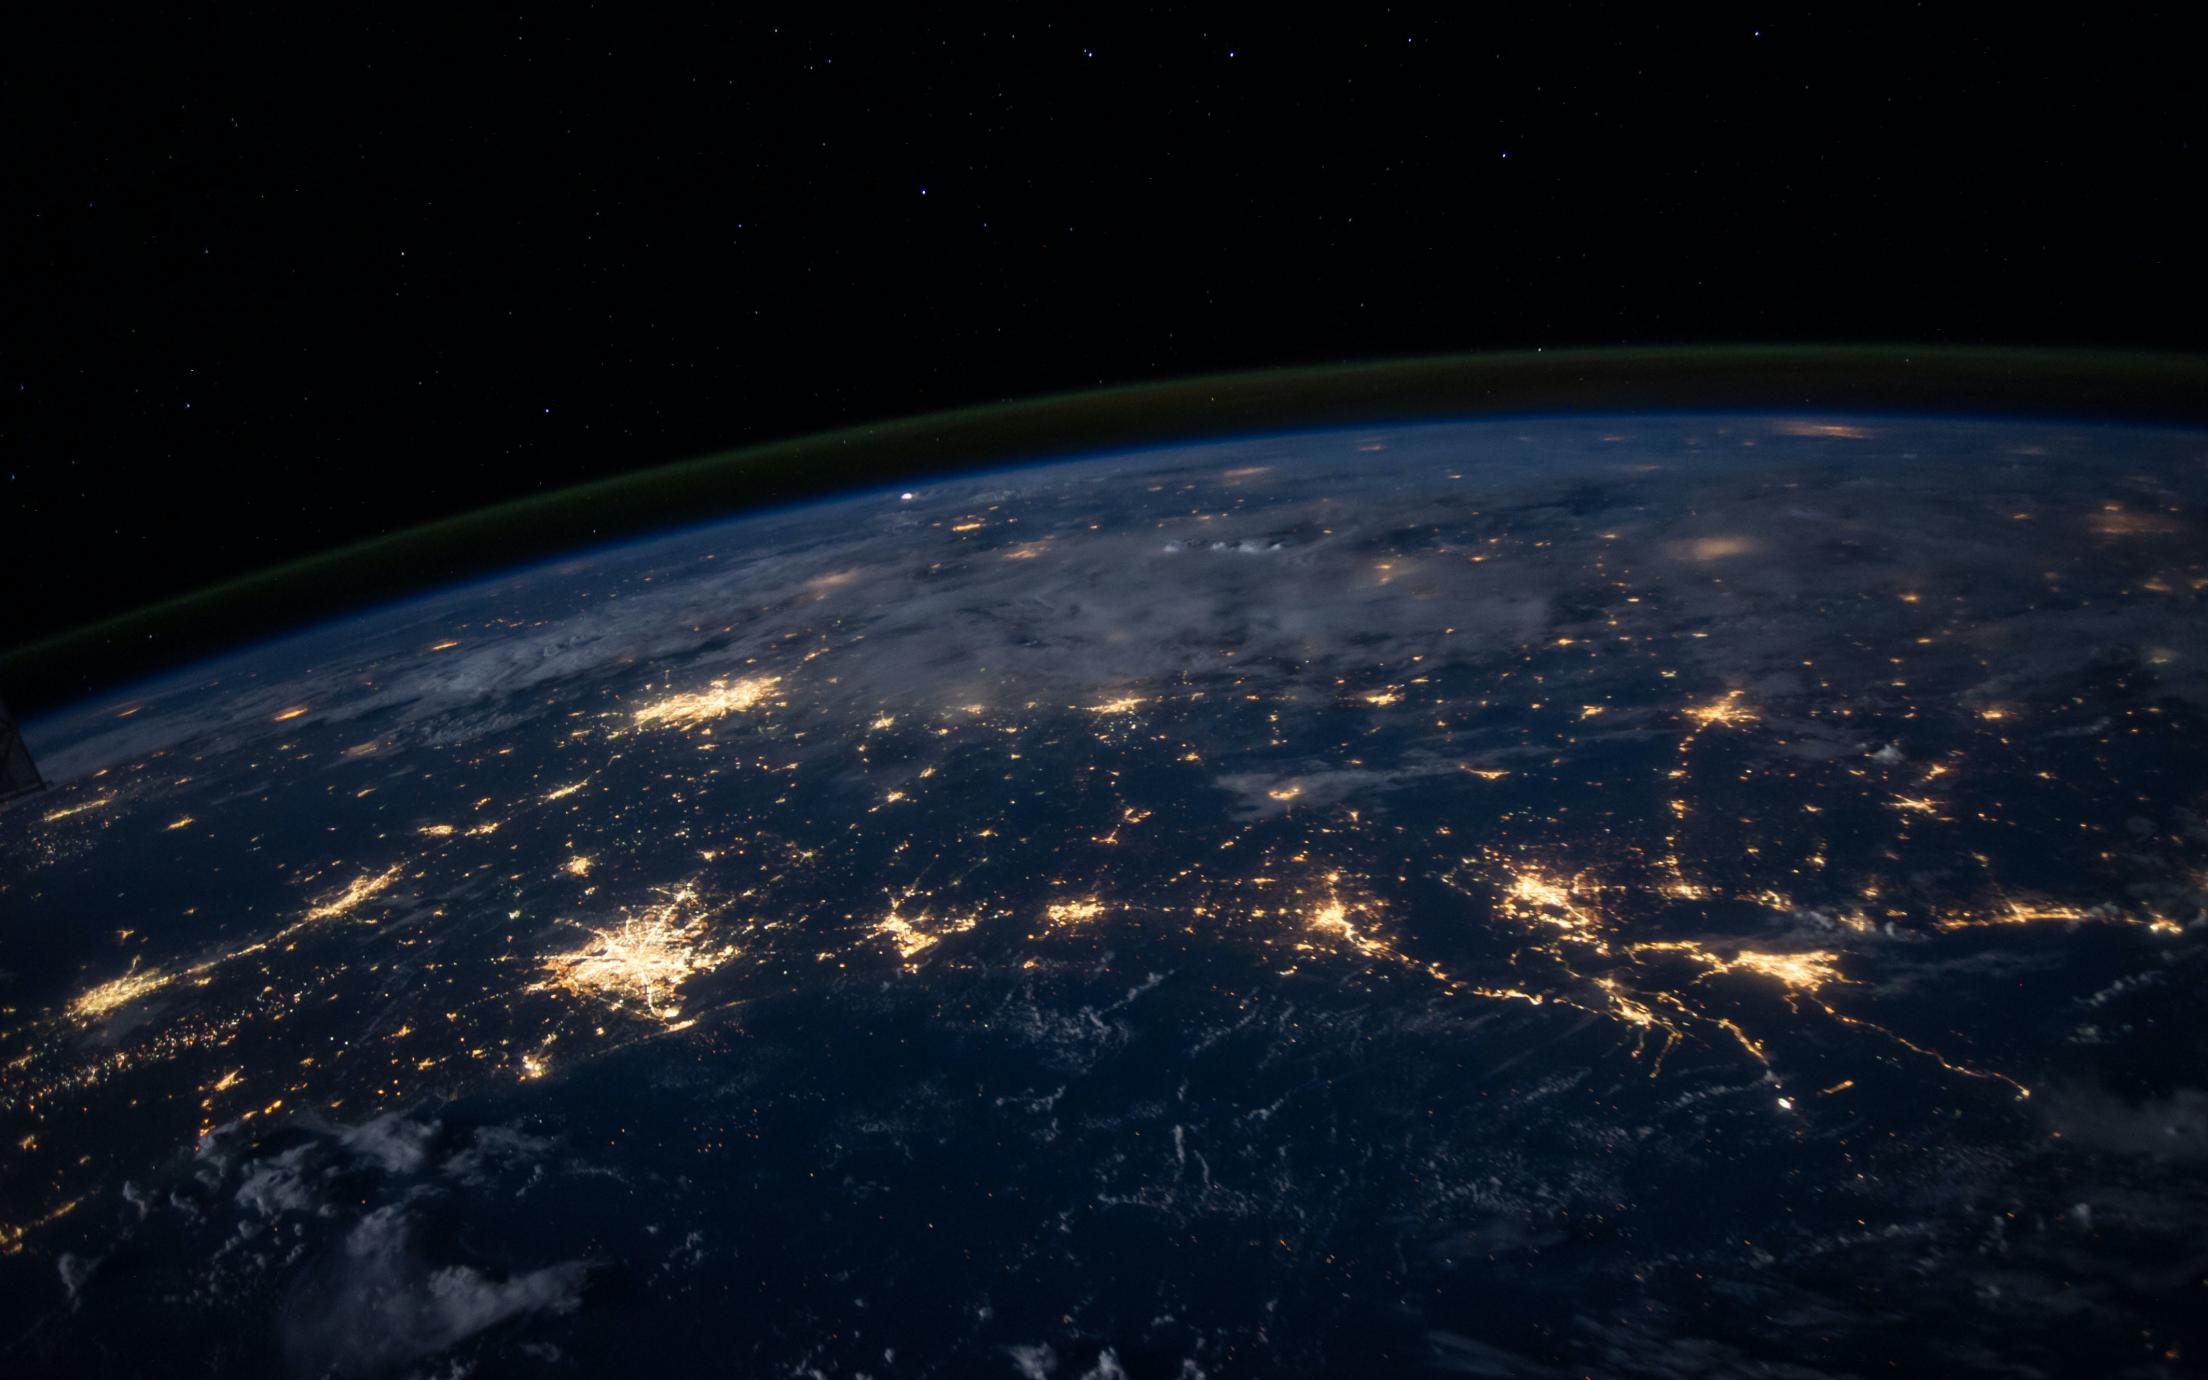 The world seen from space with lights of cities visible